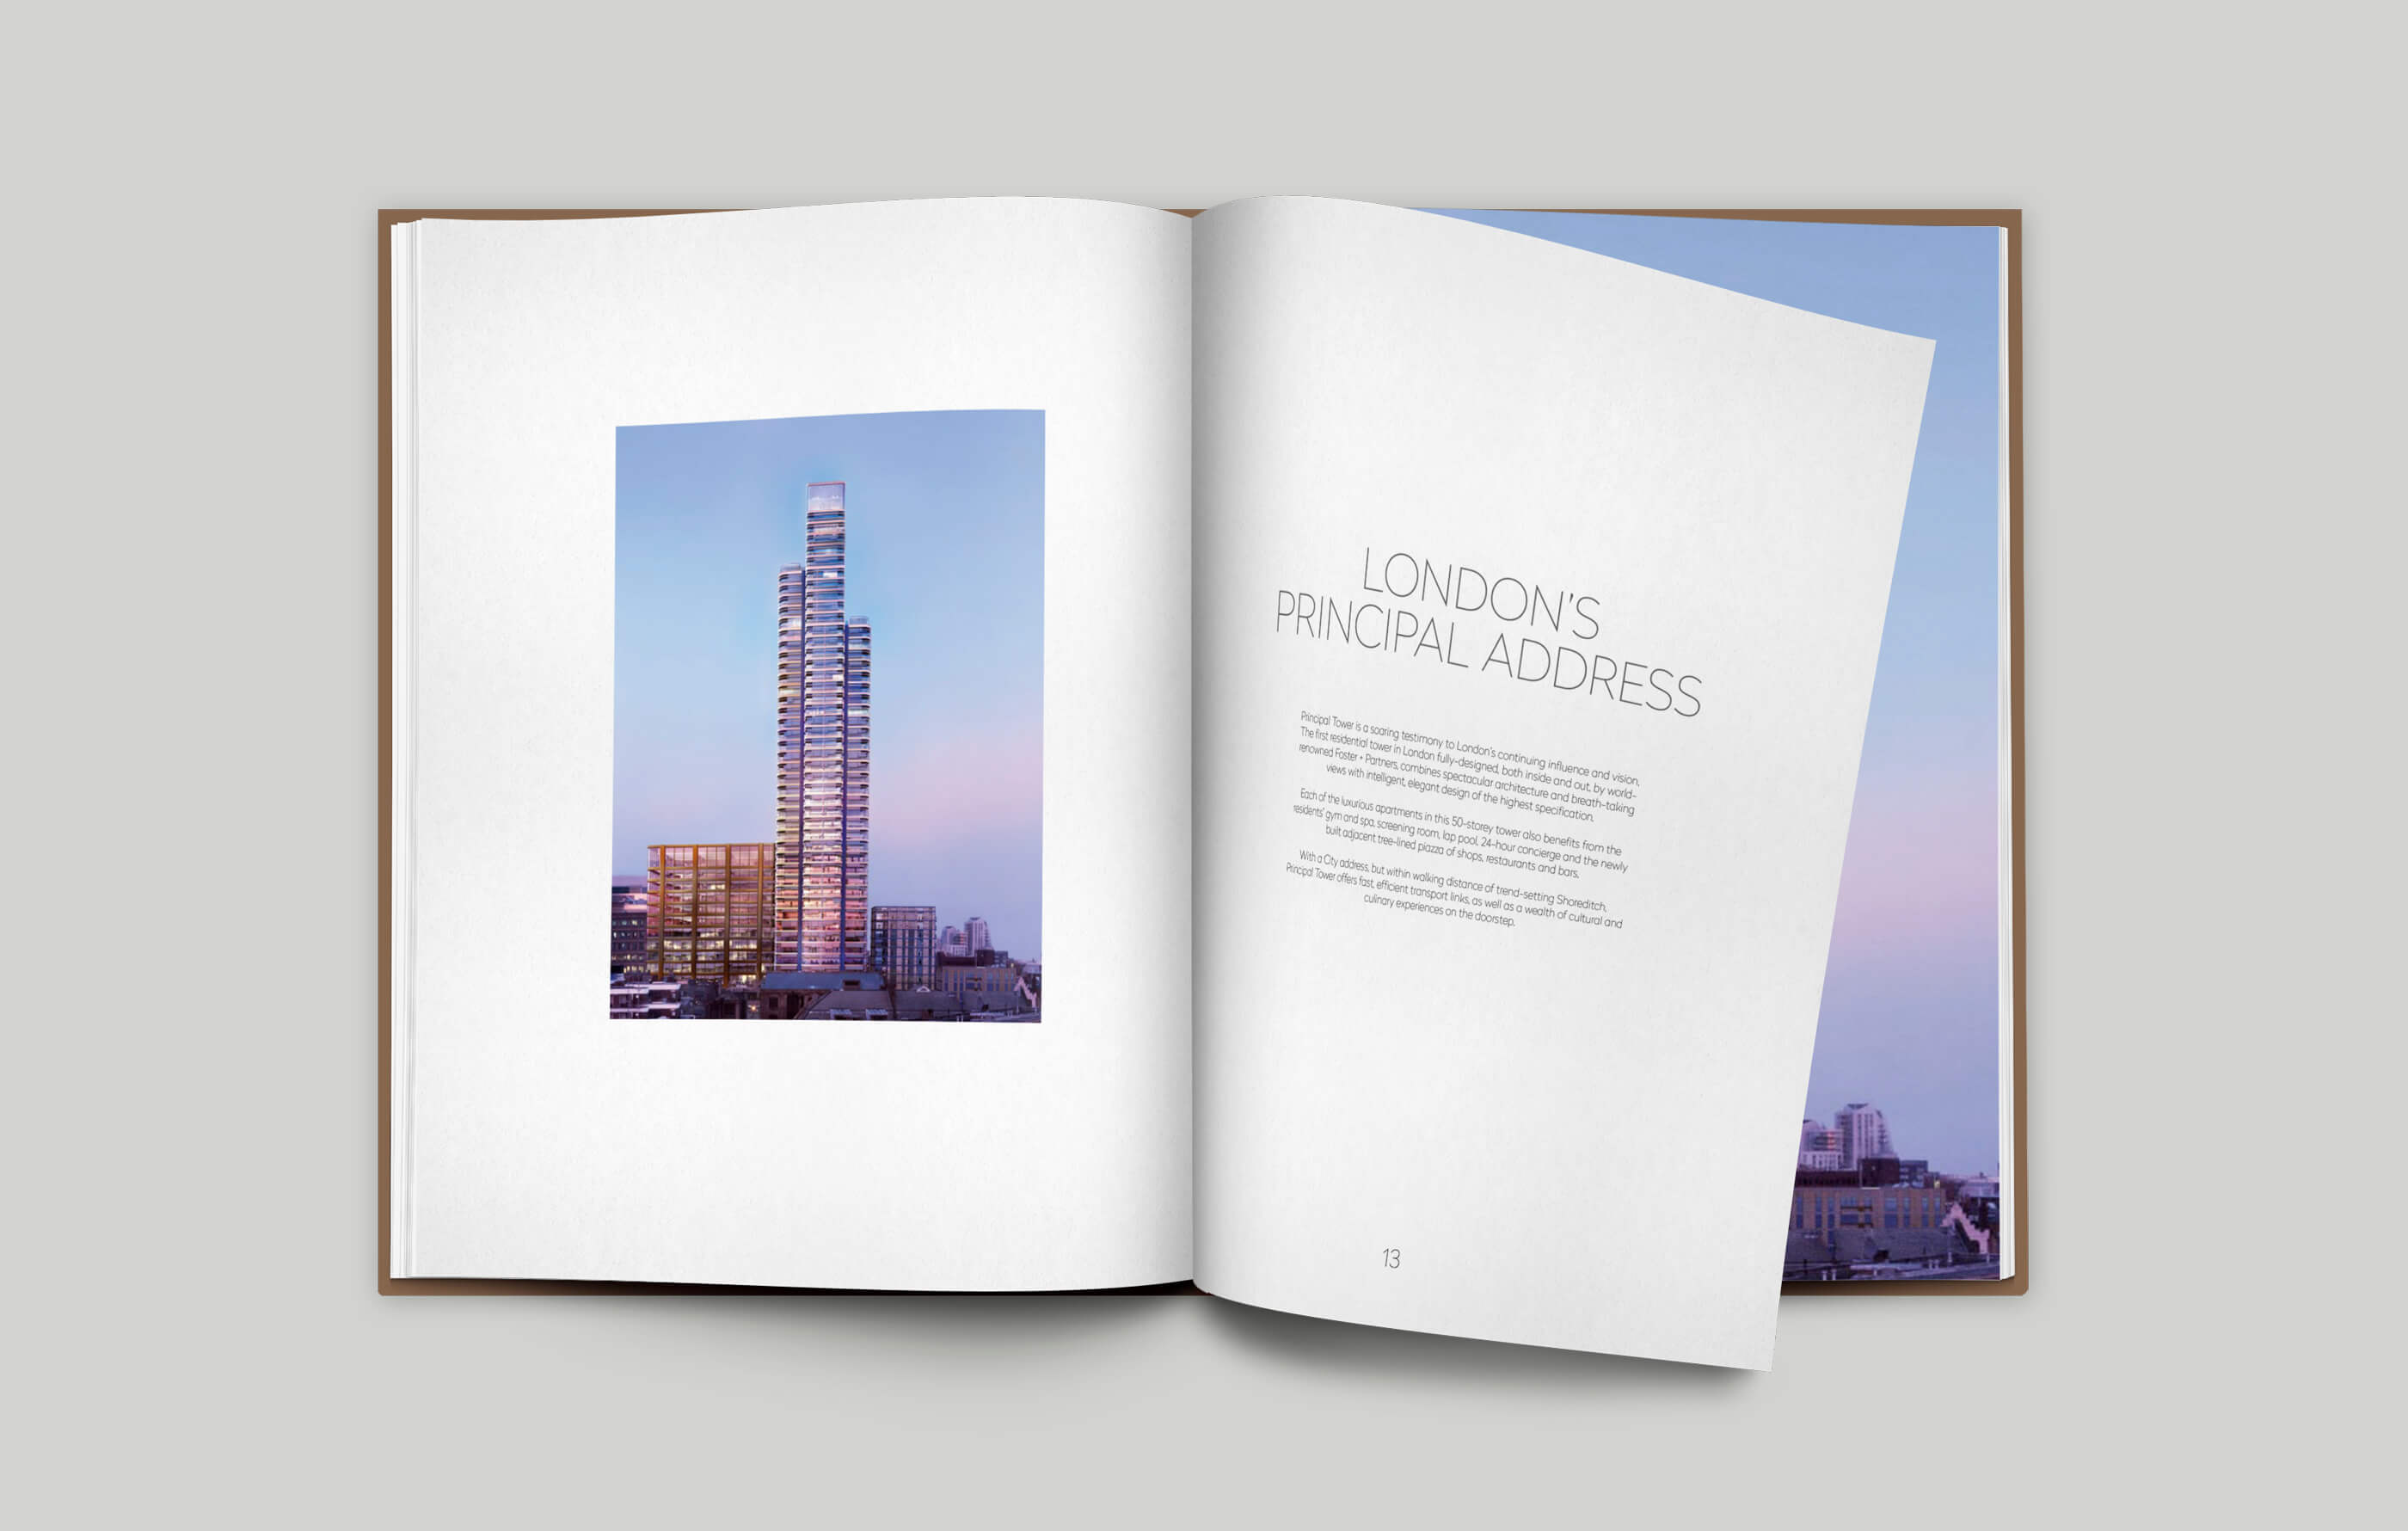 Open brochure spread on a grey background highlighting the development's prime location and principal address in EC2